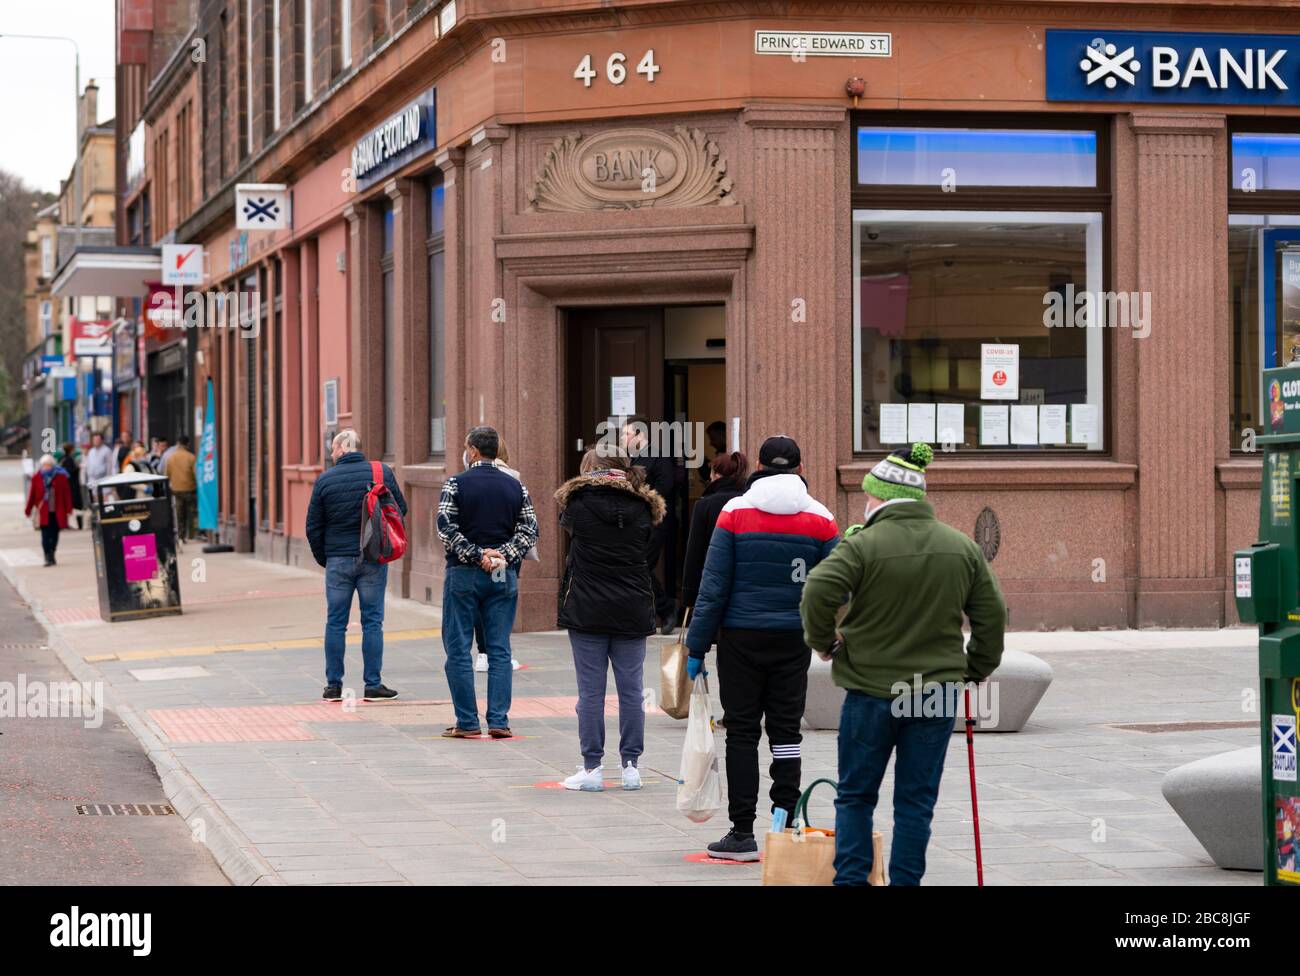 Glasgow, Scotland, UK. 3 April, 2020. Images from the south side of Glasgow at the end of the second week of Coronavirus lockdown. Customers queue to enter the Bank of Scotland branch on Victoria Road, Govanhill. Iain Masterton/Alamy Live News Stock Photo